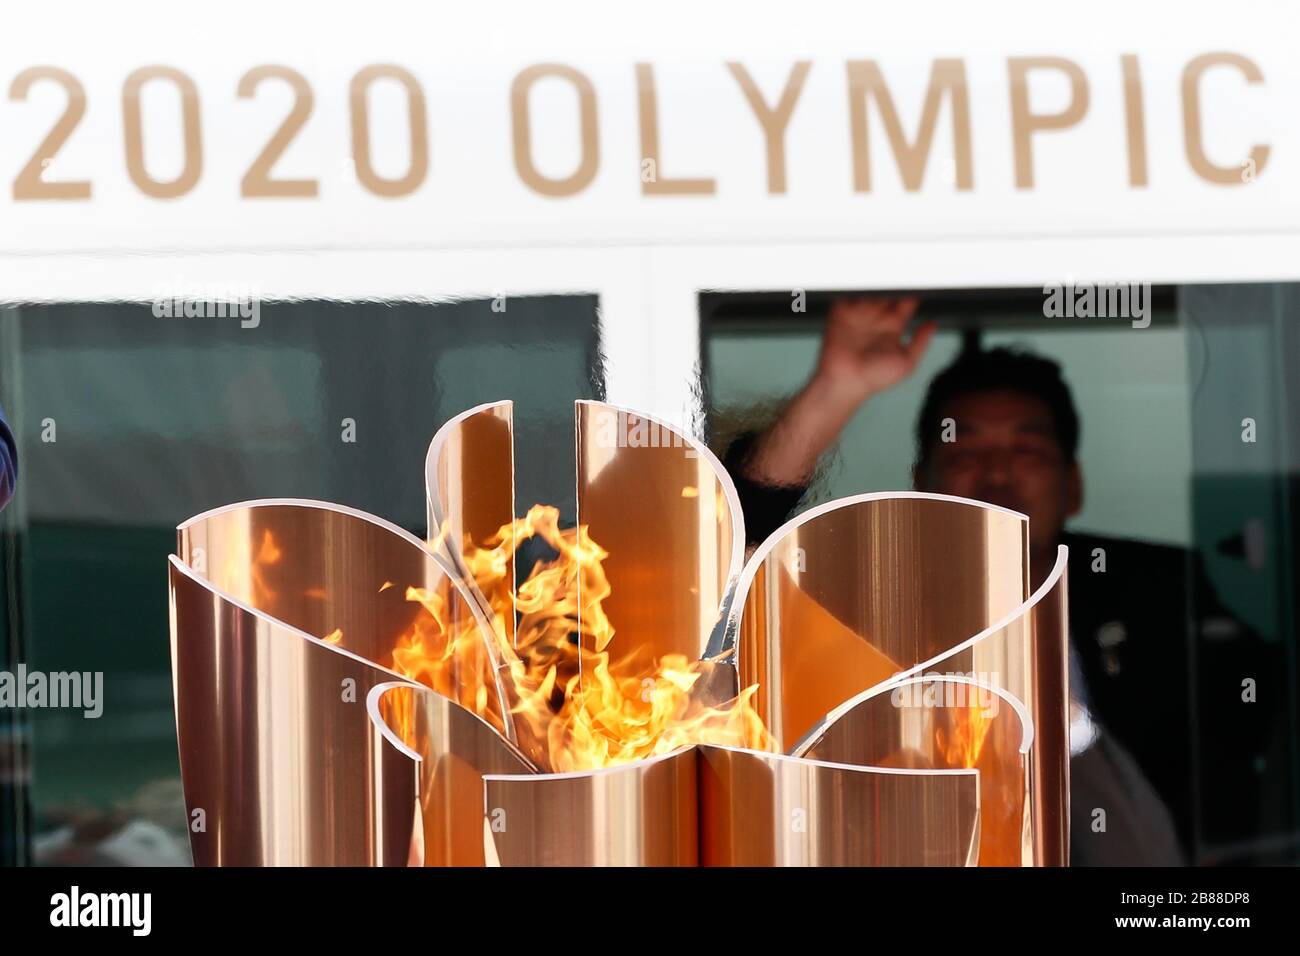 March 20, 2020, Matsushima, Japan: The Olympic Flame is seen during the Olympic Flame Arrival Ceremony at Japan Air Self-Defense Force (JASDF) Matsushima Base in Miyagi Prefecture. Members of the Tokyo Organising Committee of the Olympic and Paralympic Games (Tokyo 2020) received the Olympic Flame after the Tokyo 2020 Olympic Torch Relay Special Transport Aircraft returning from Greece with the Olympic Games symbol. (Credit Image: © Rodrigo Reyes Marin/ZUMA Wire) Stock Photo